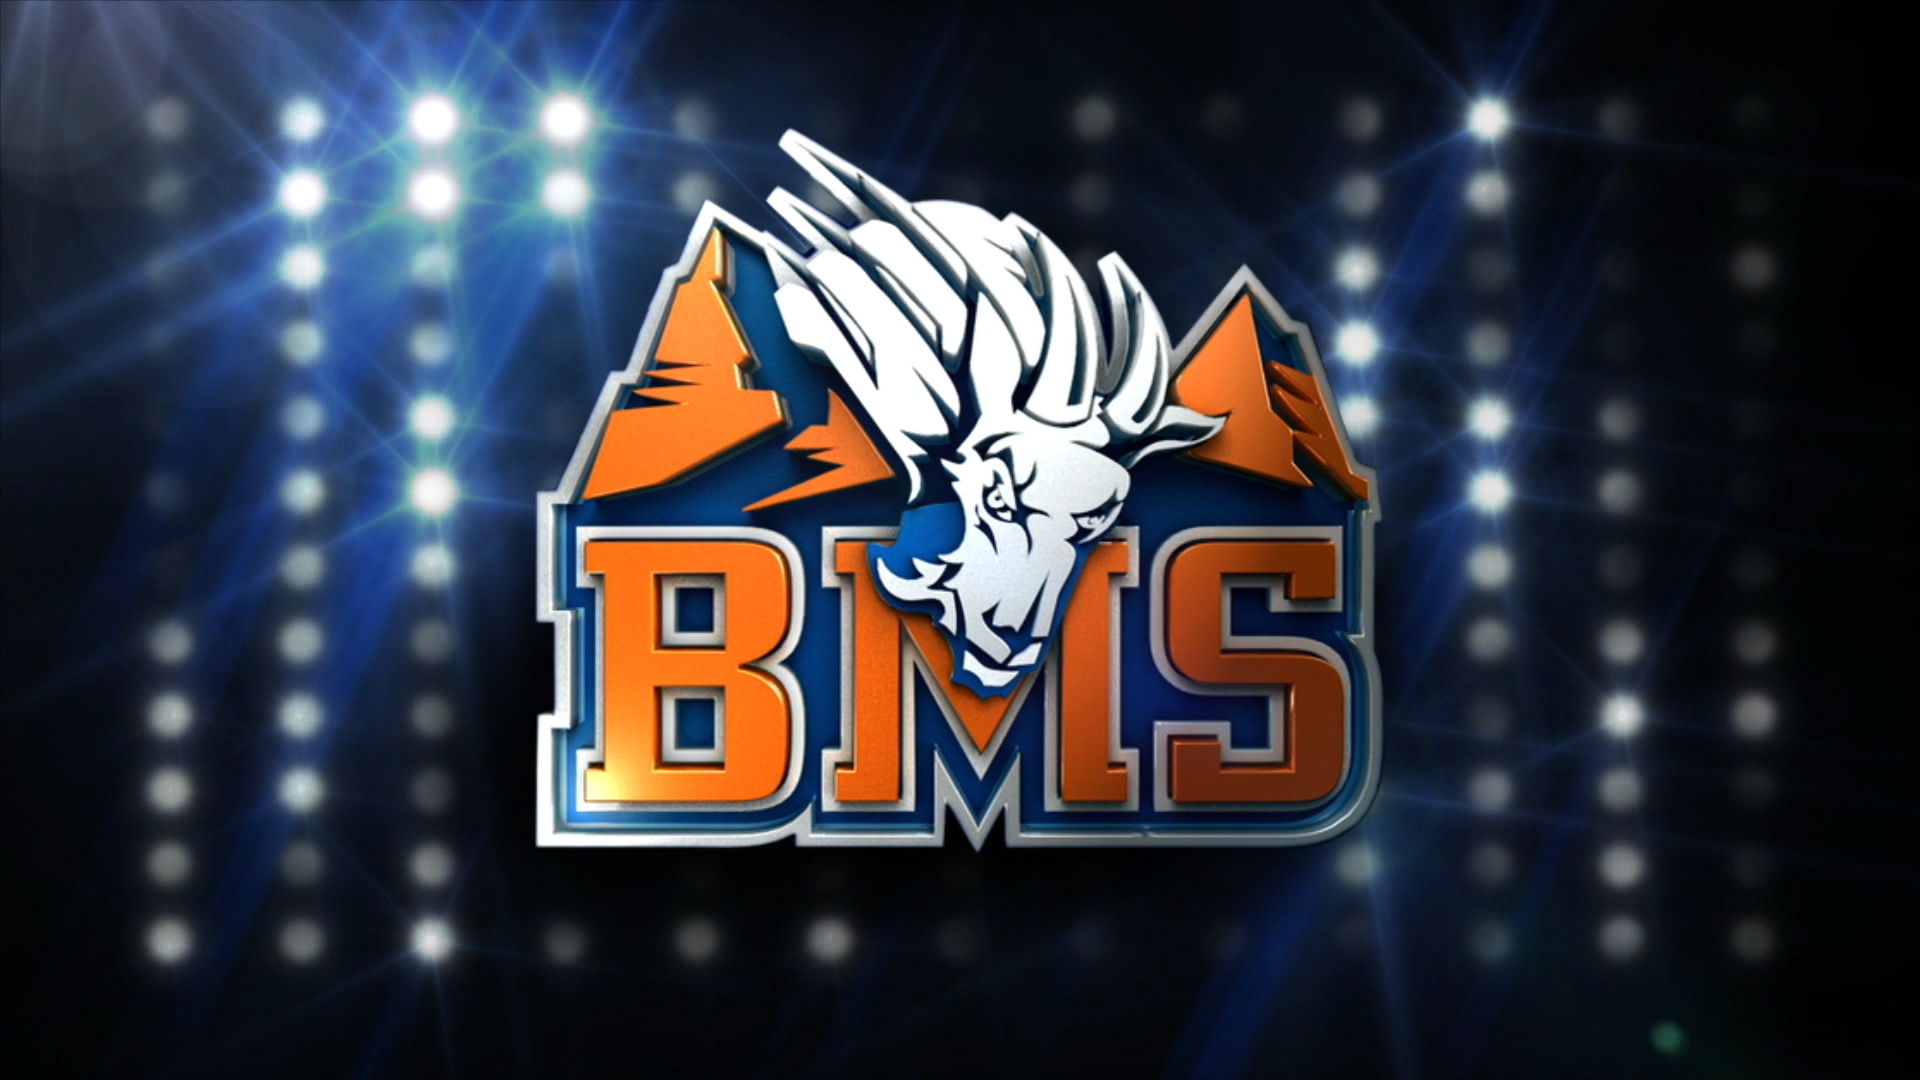 bms wallpaper,logo,font,graphics,team,competition event